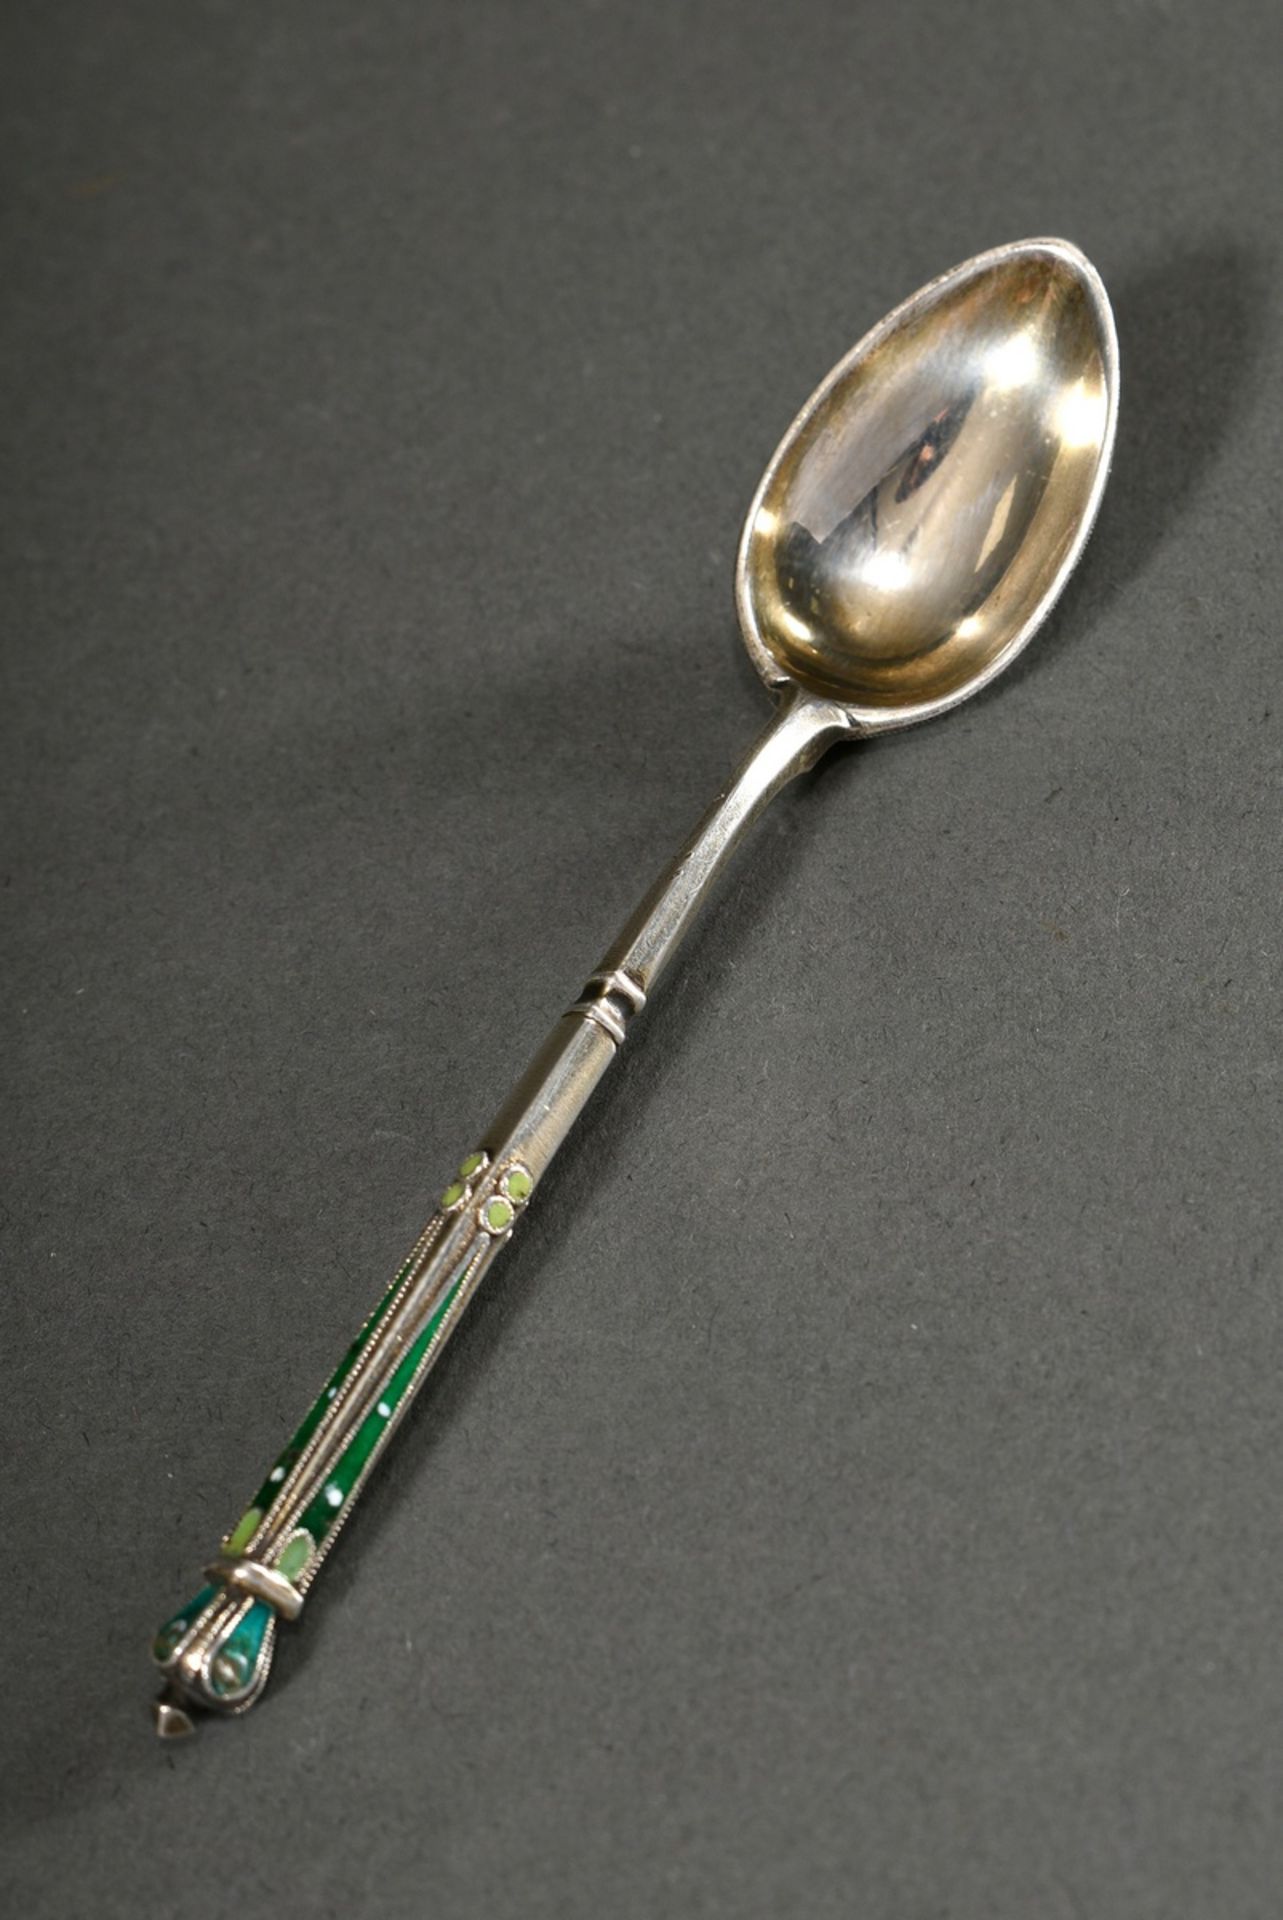 Oval Russian sugar basket with engraved floral frieze and folding handle, with enamelled spoon, MM: - Image 7 of 7